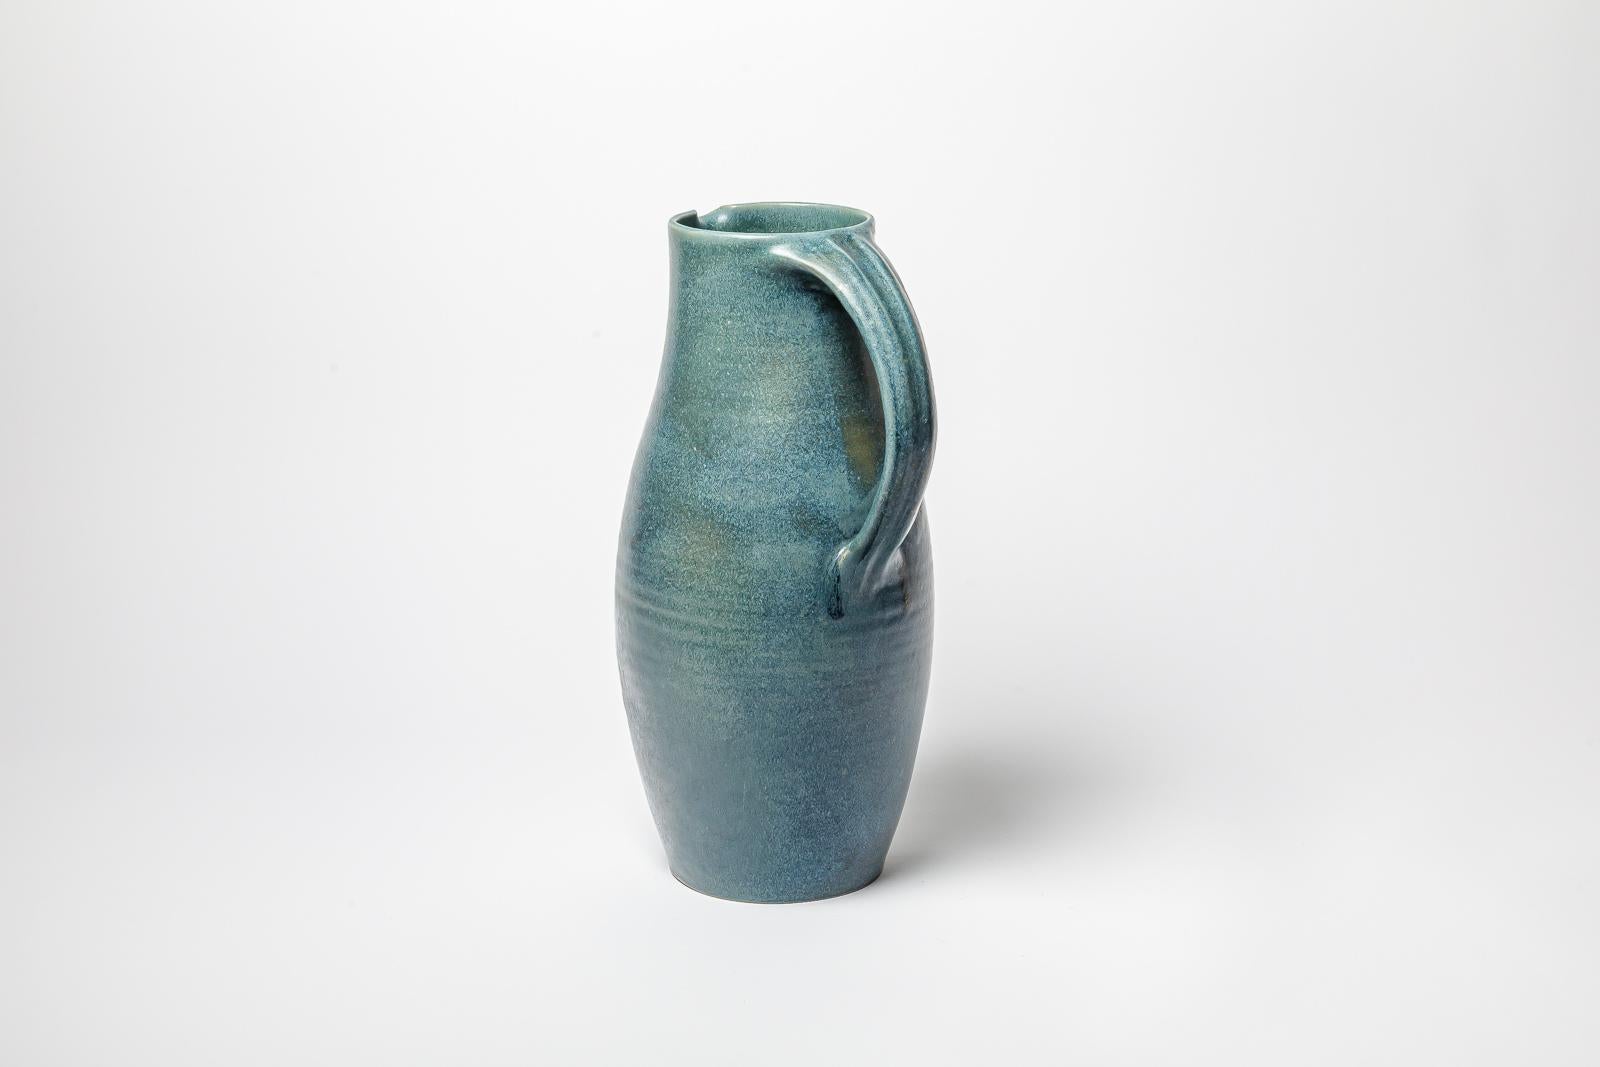 Beaux Arts Blue glazed ceramic pitcher by Roger Jacques, circa 1960-1970. For Sale